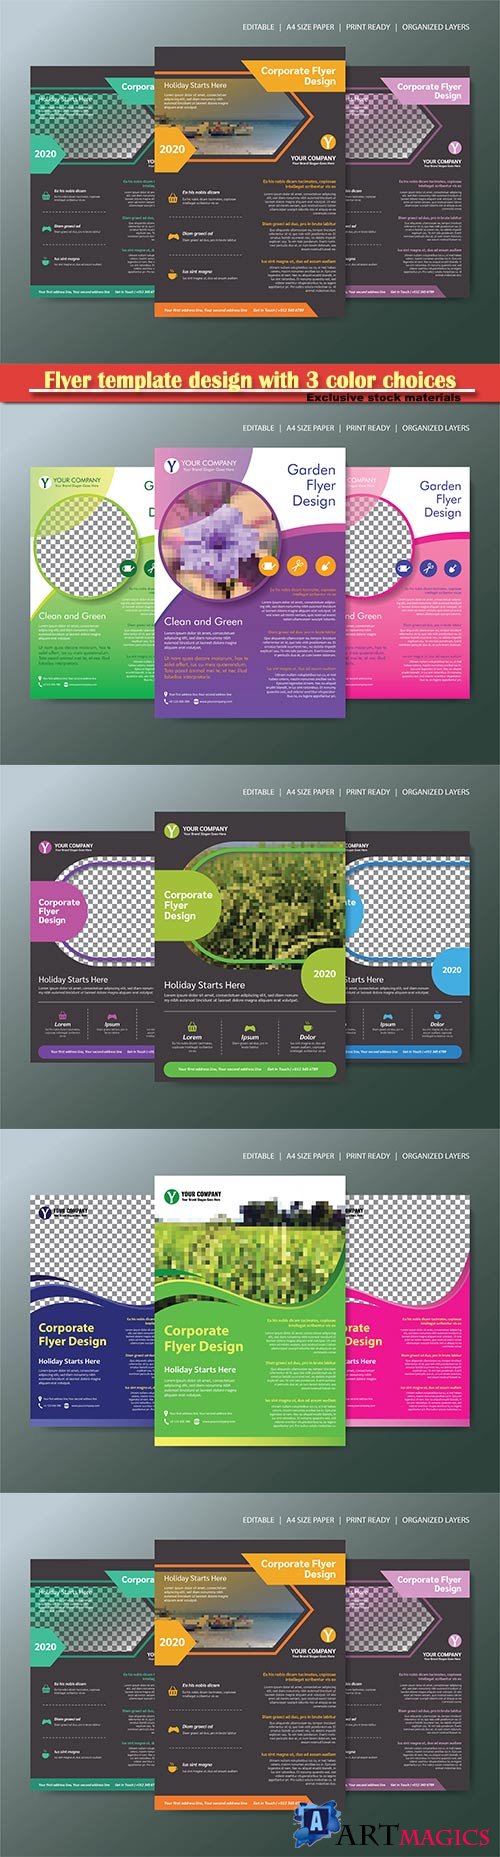 Flyer template design with 3 color choices, organized layer